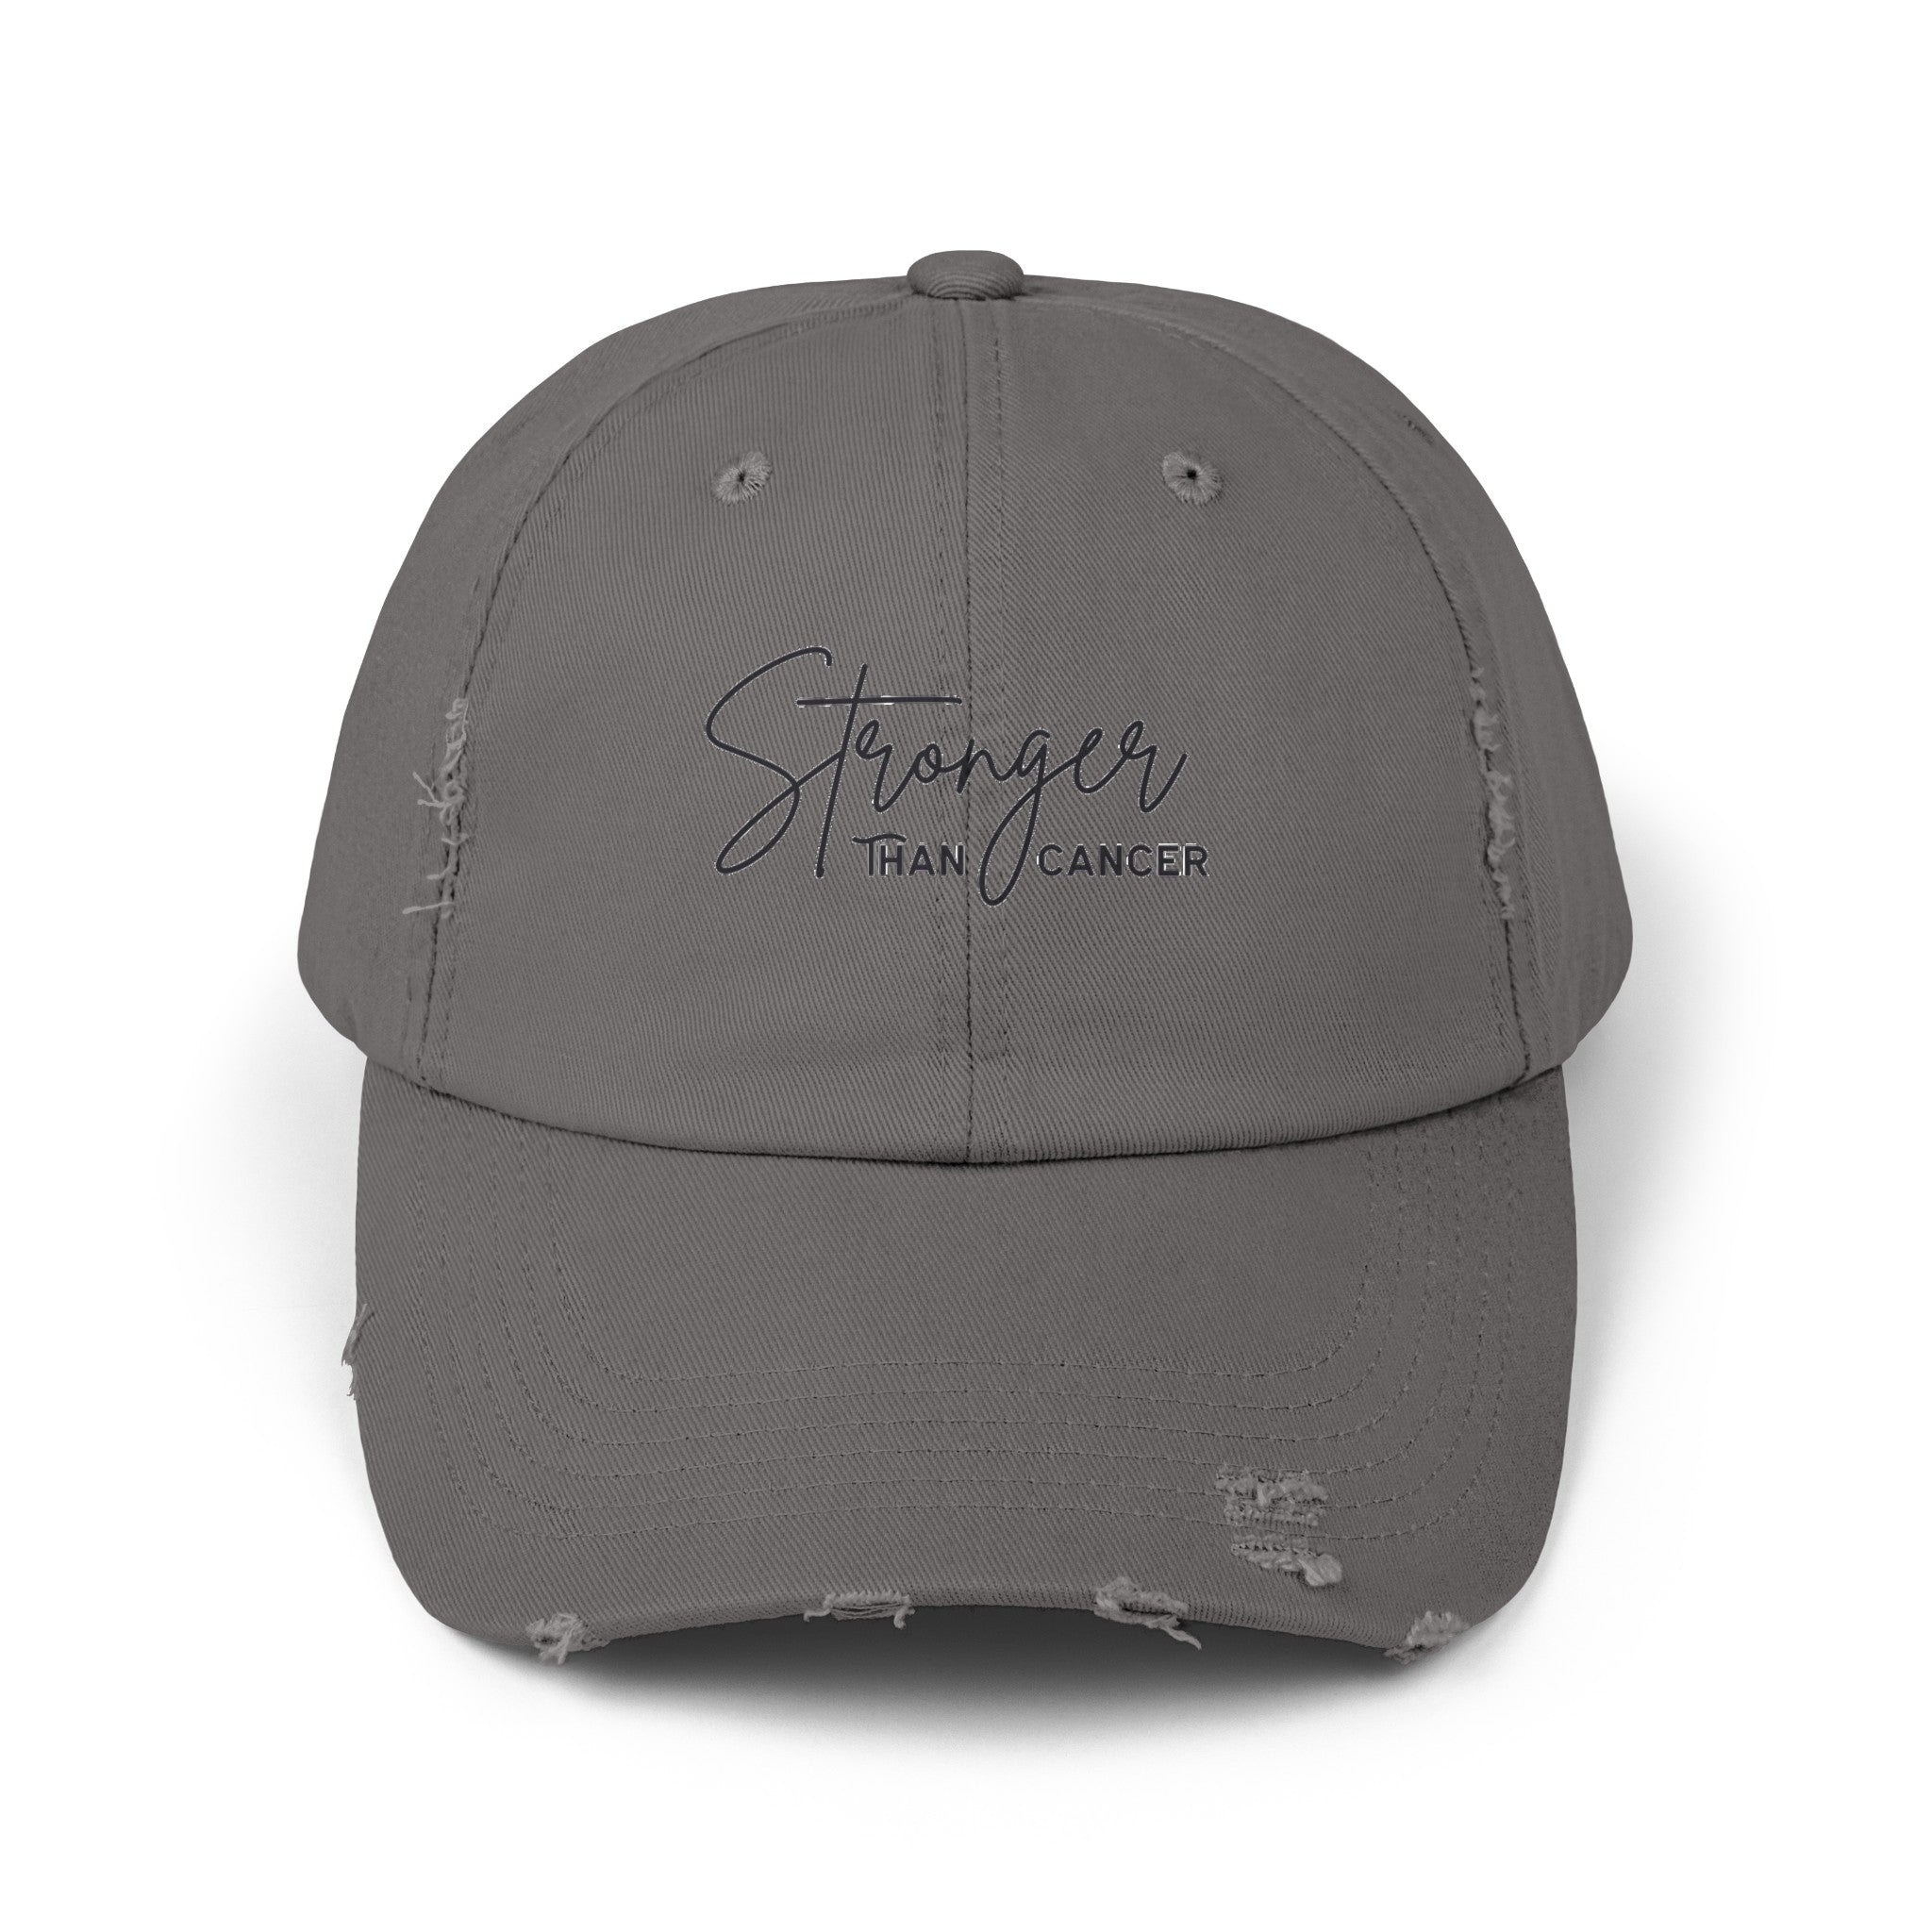 Distressed Cap Stronger Than Cancer - Nickel / One size - Hats